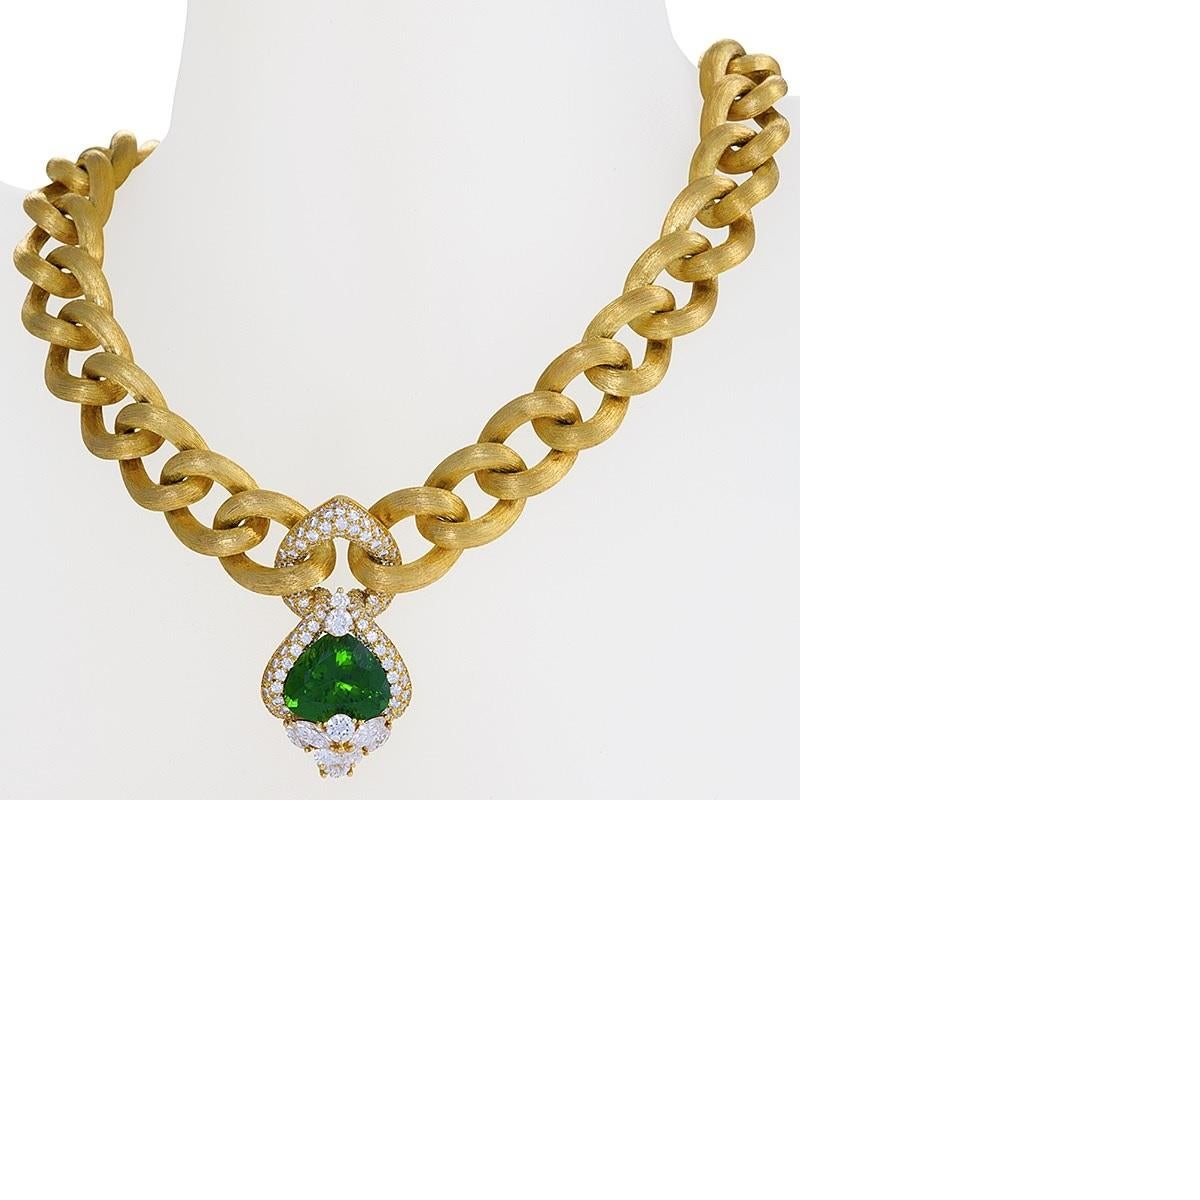 An 18 karat gold necklace with peridot and diamonds by Henry Dunay. The necklace has brushed gold curb links centering one heart shape peridot with an approximate total weight of 15.60 carats; 6 round brilliant-cut diamonds and 4 marquise-cut